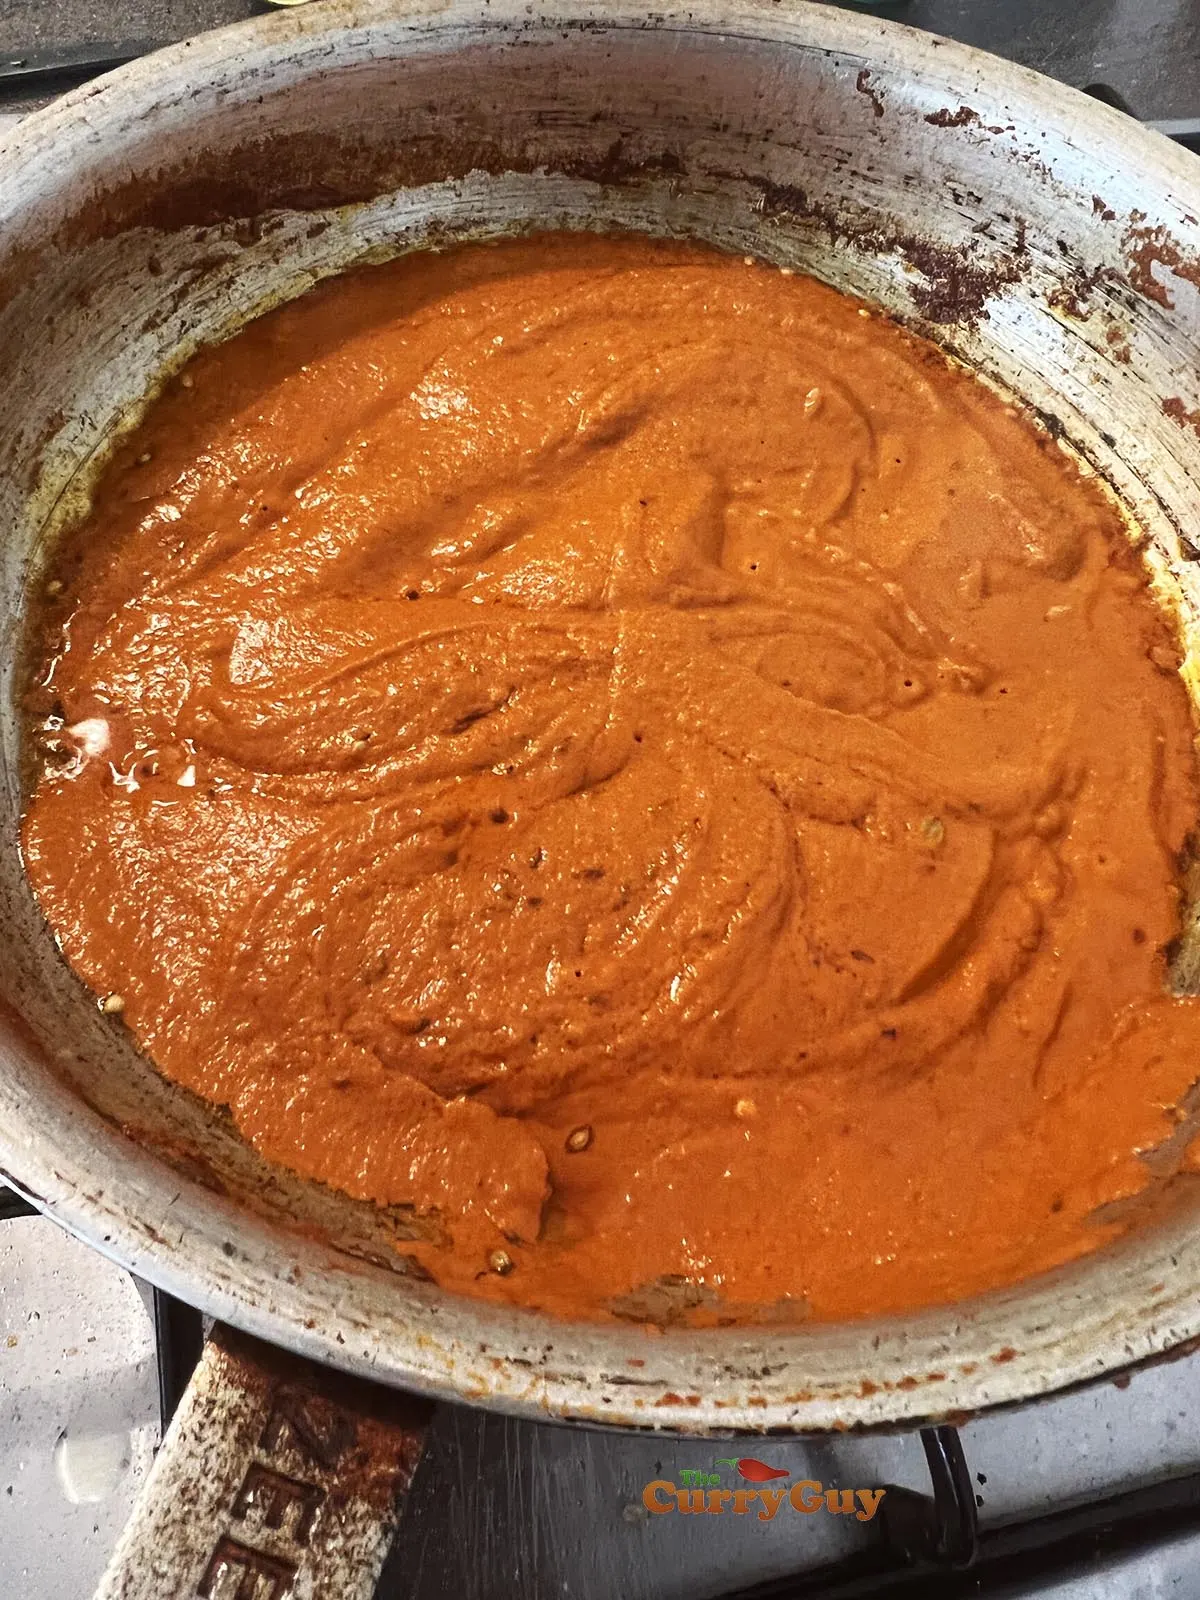 Adding blended sauce to pan.